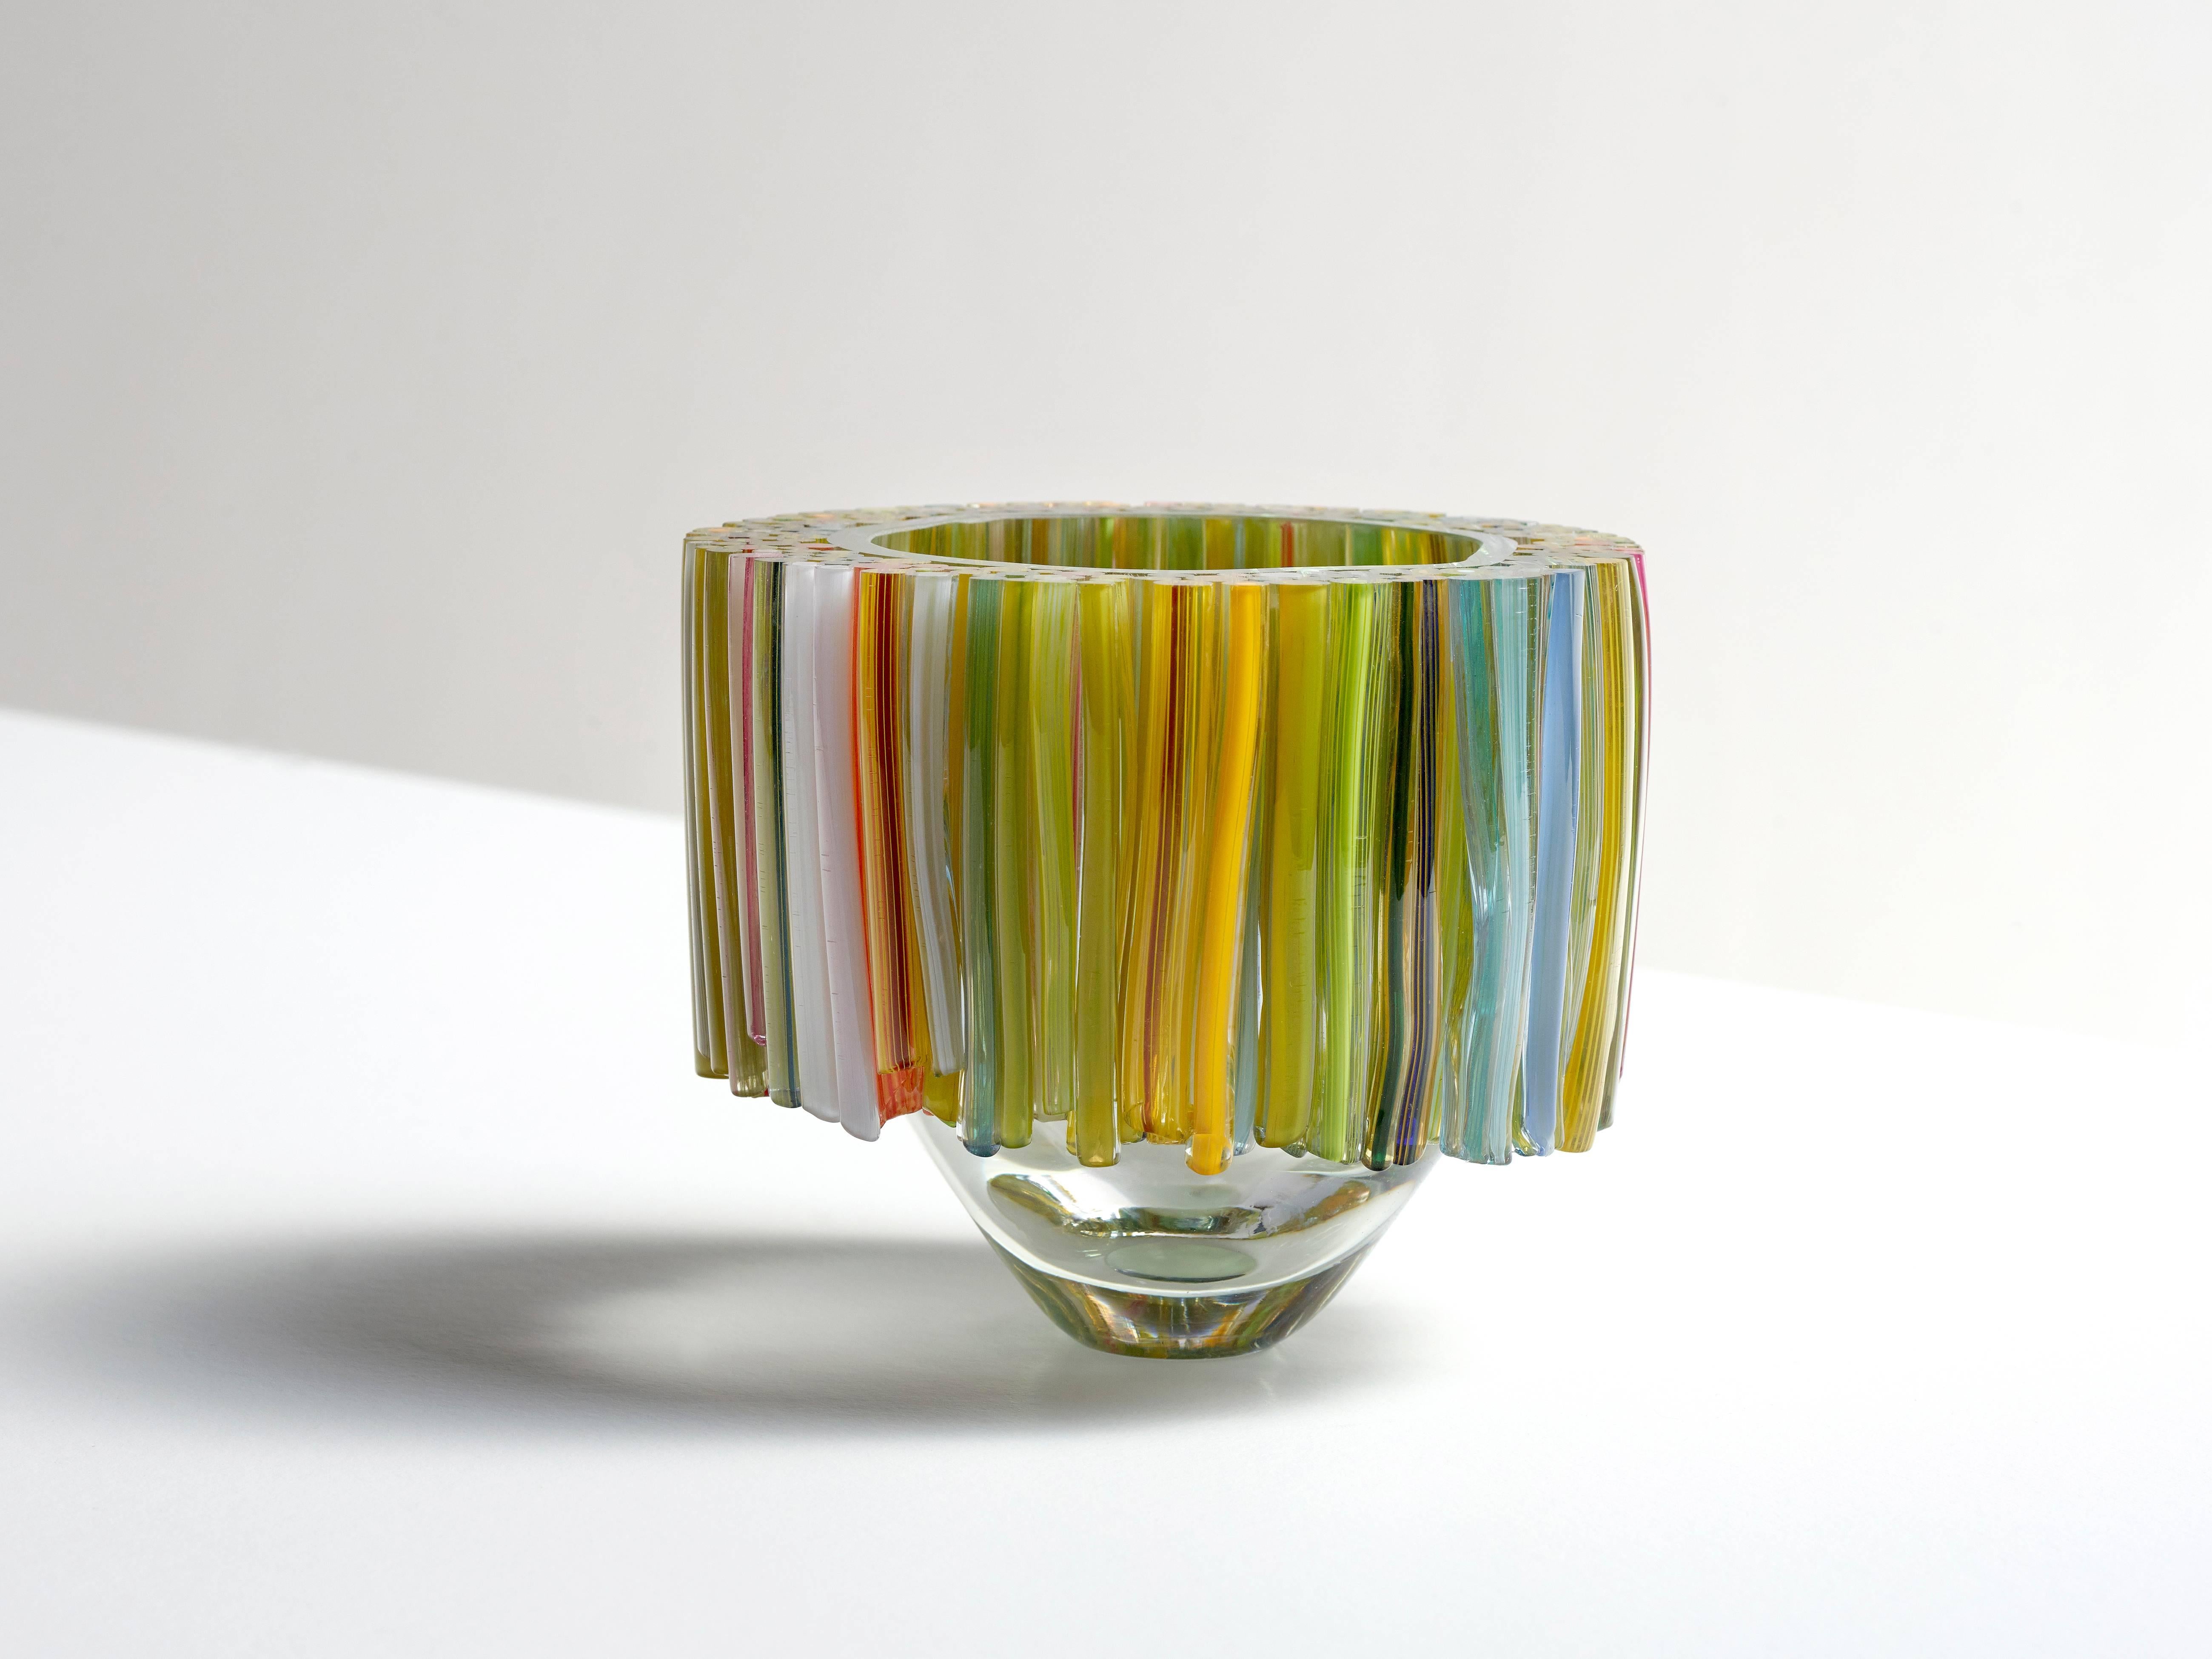 This beautiful clear blown glass bowl is decorated with handcrafted glass threads that are melted to the body of the glass vessel. The colors of the threads are in different shades of green and yellow, but also with some hidden highlights in pink,